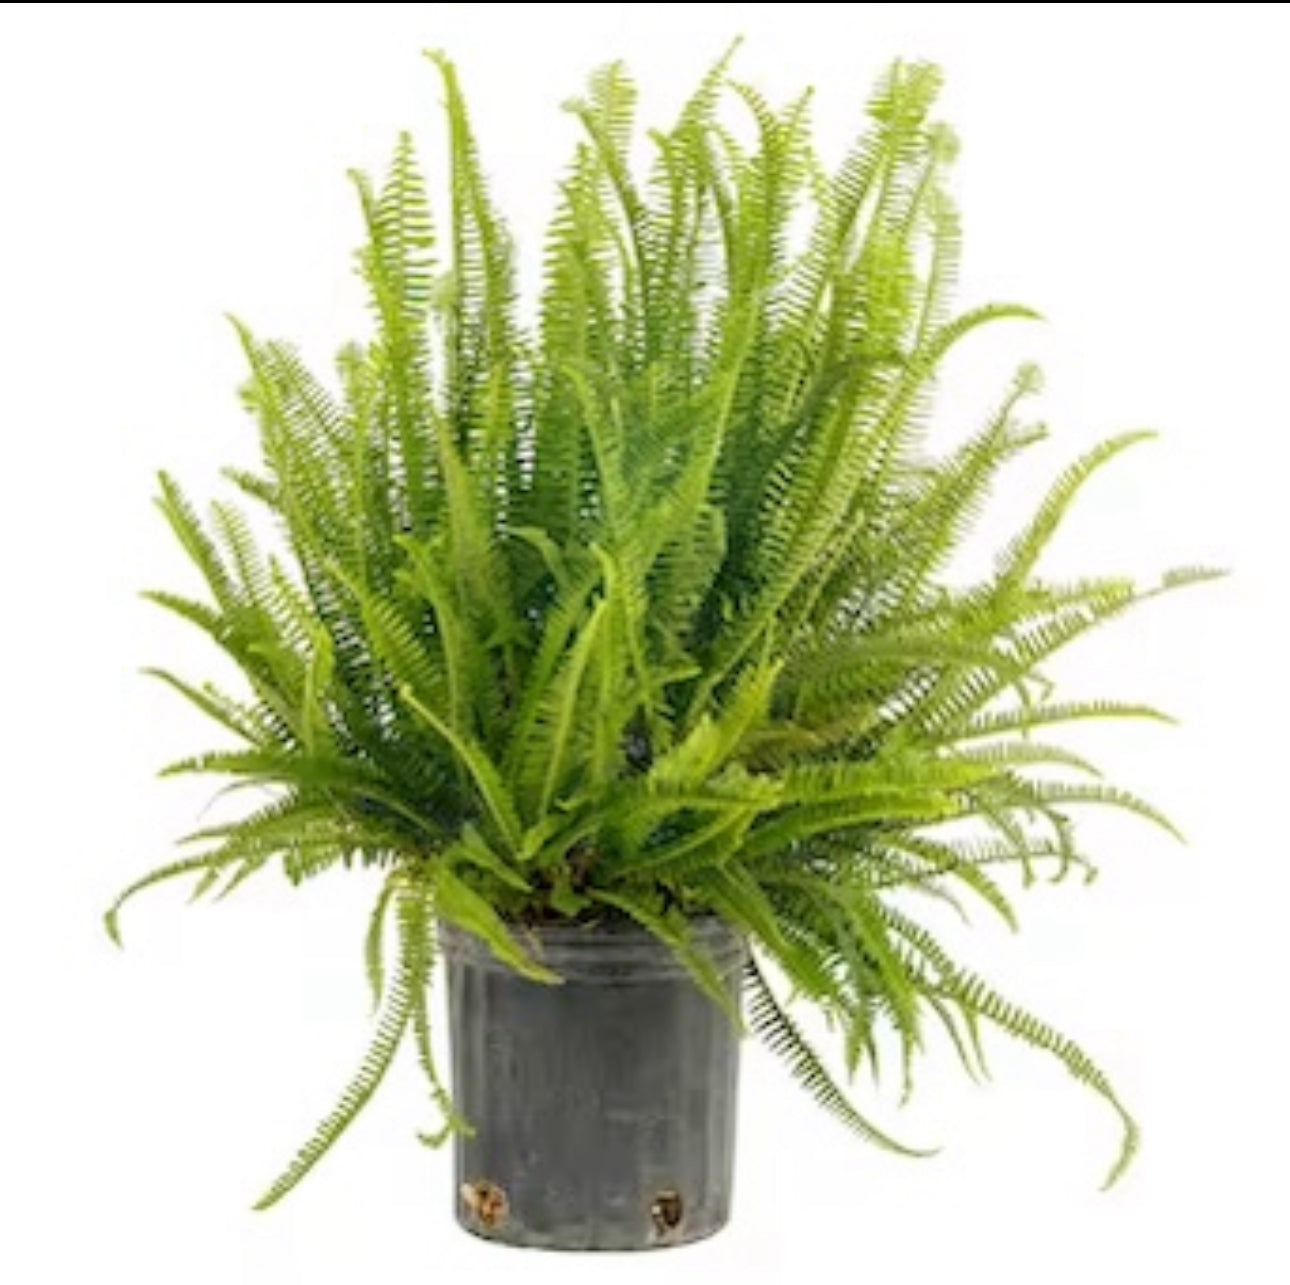 Live Plant-Kimberly Queen Fern PREORDER